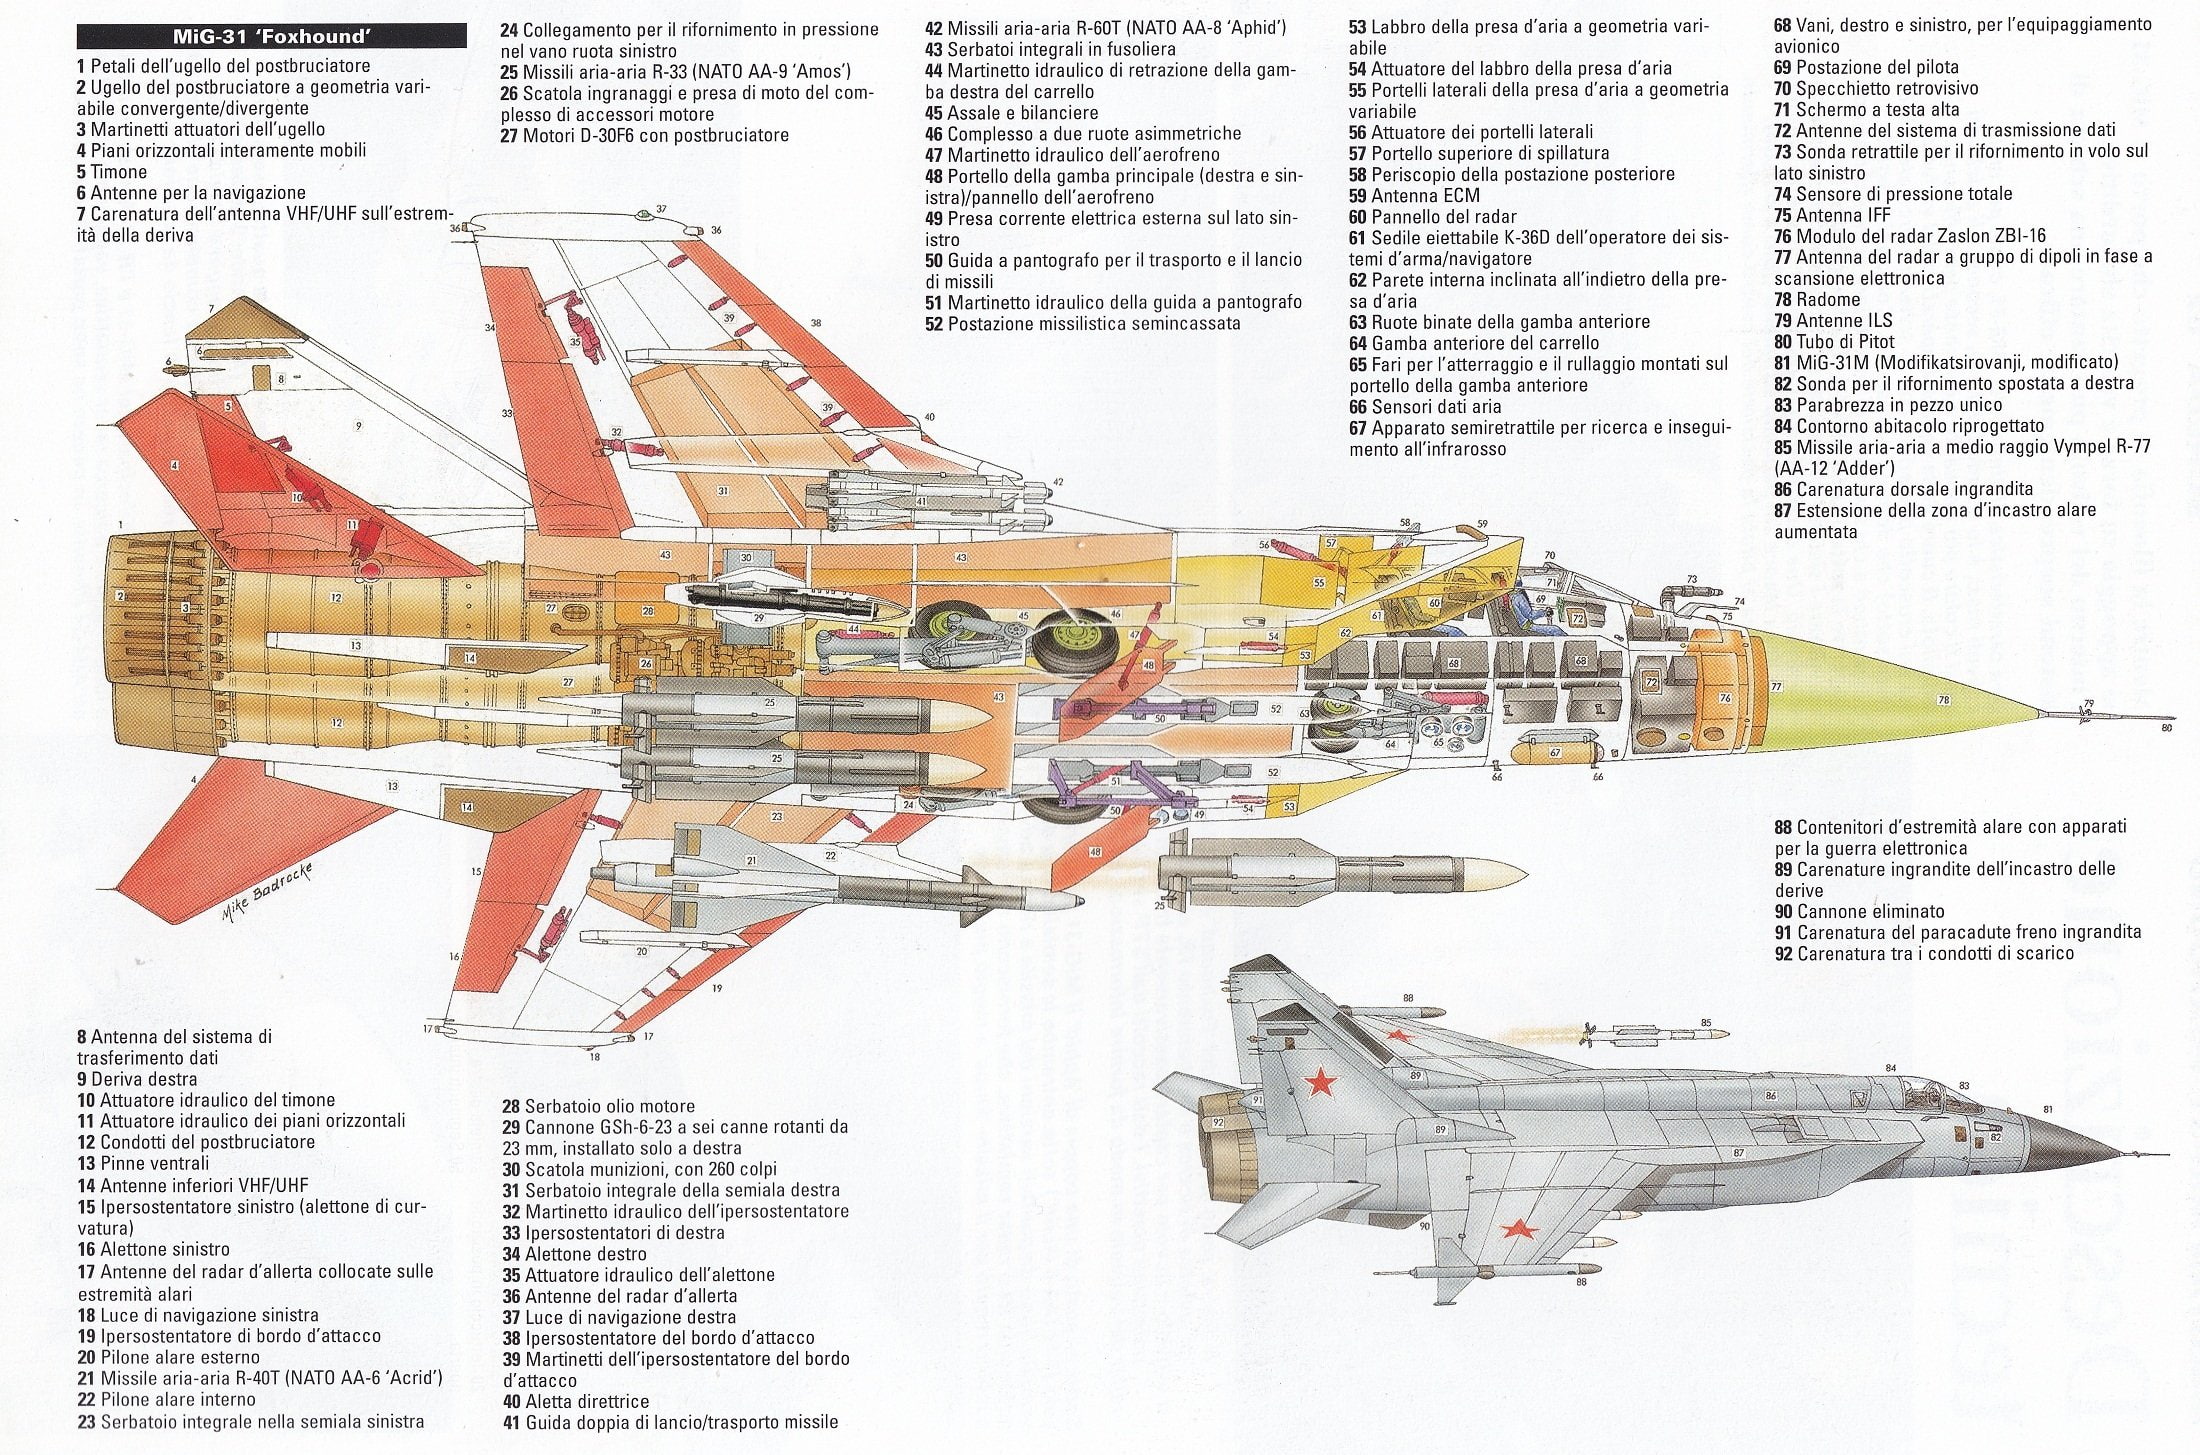 airplane, blueprint, drawing, fighter, jet, mig, military, russian